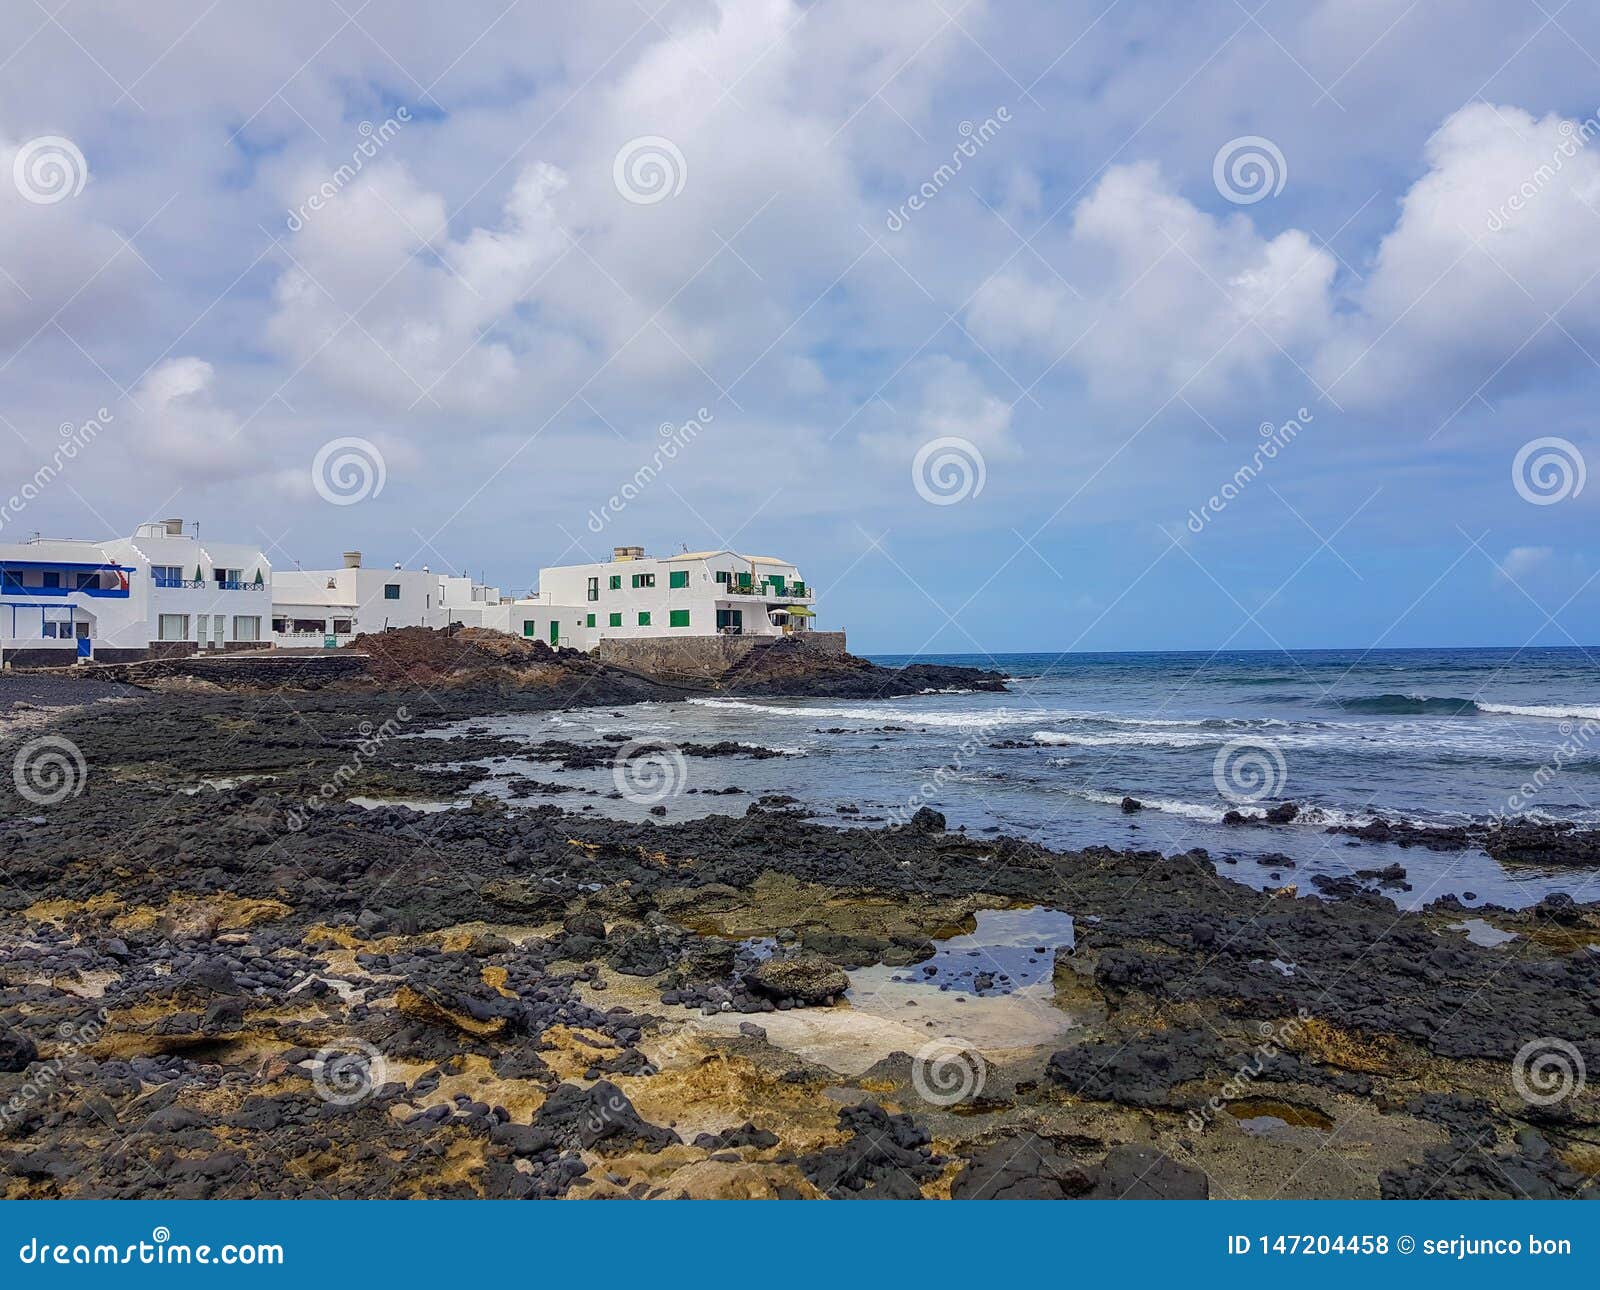 image of buildings on the coast and the sea in arrieta. lanzarote, spain